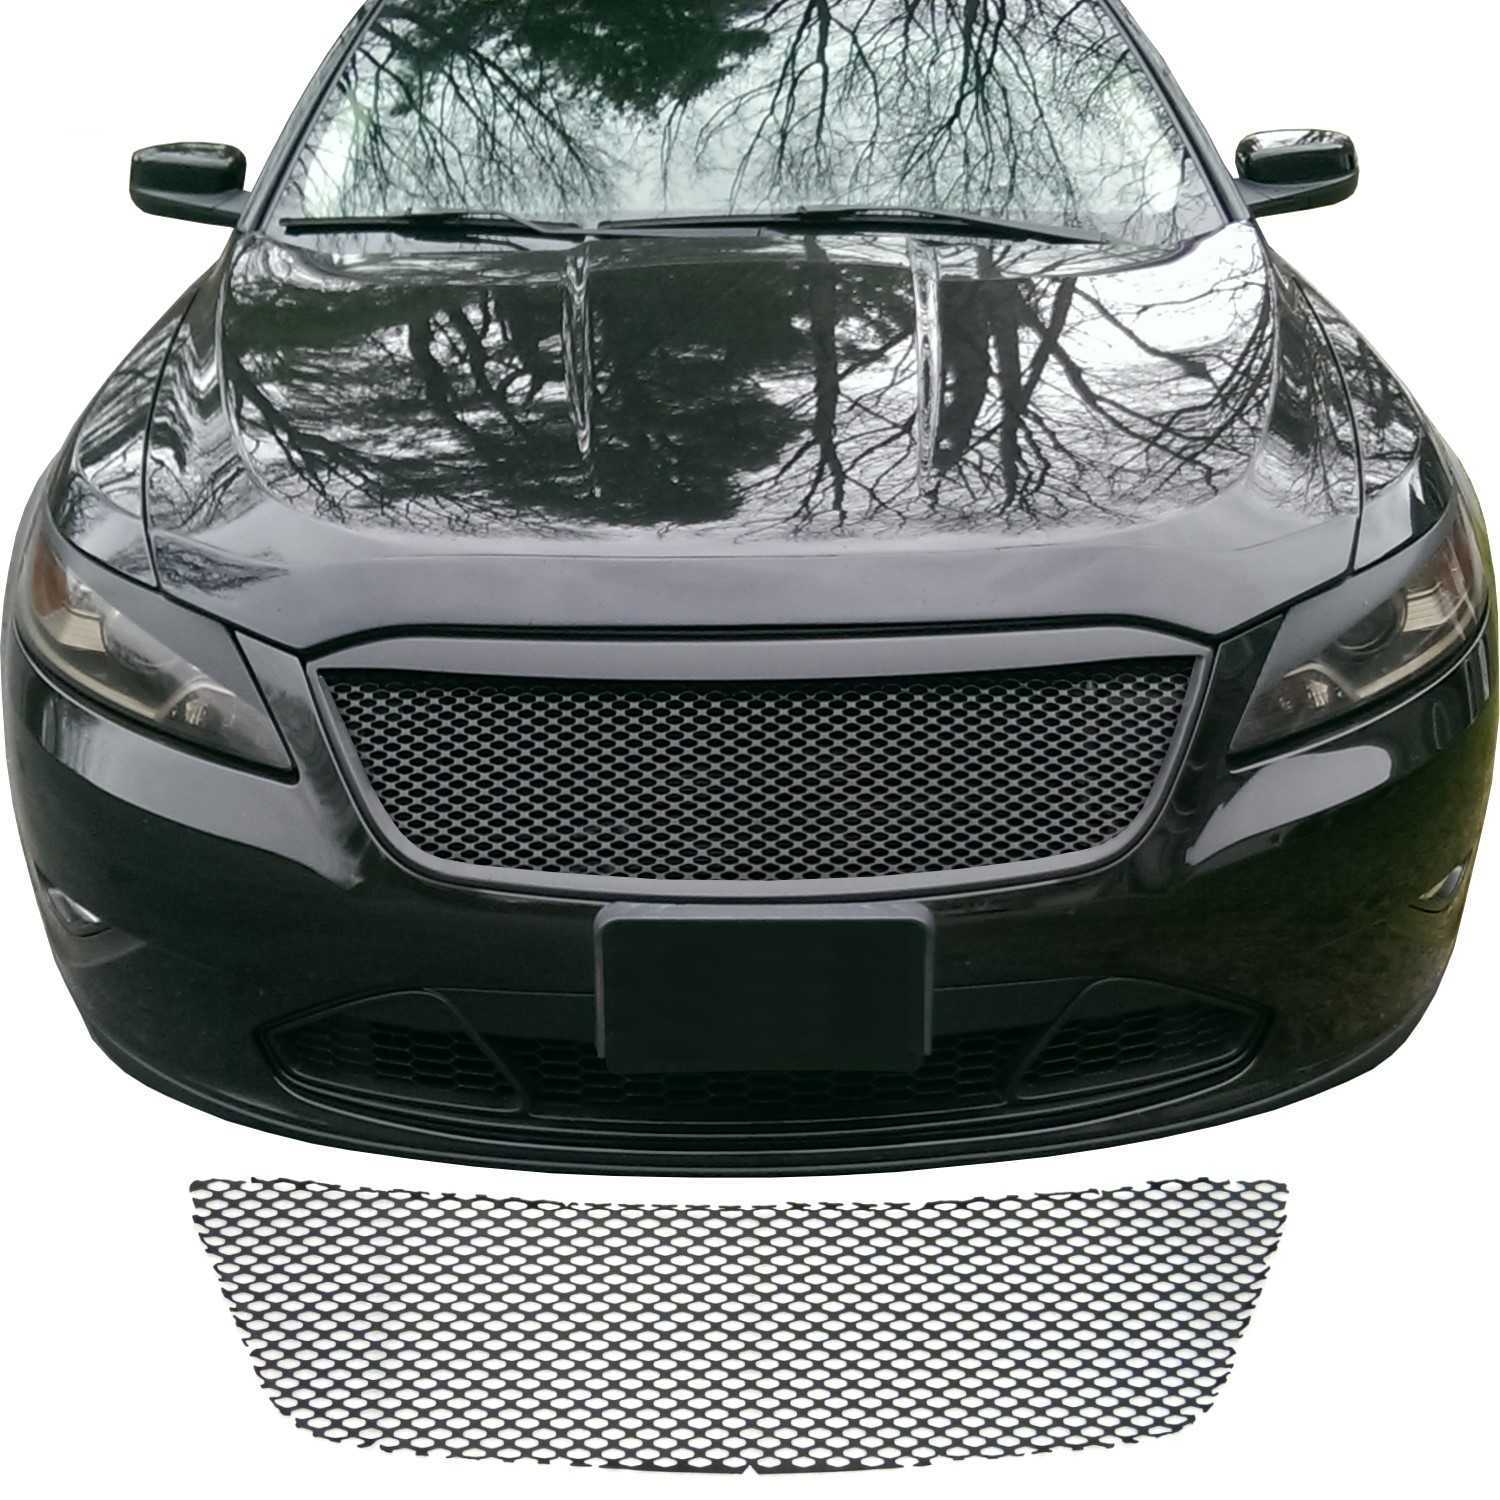 2010-2012 Ford Taurus Mesh Grill Insert by customcargrills